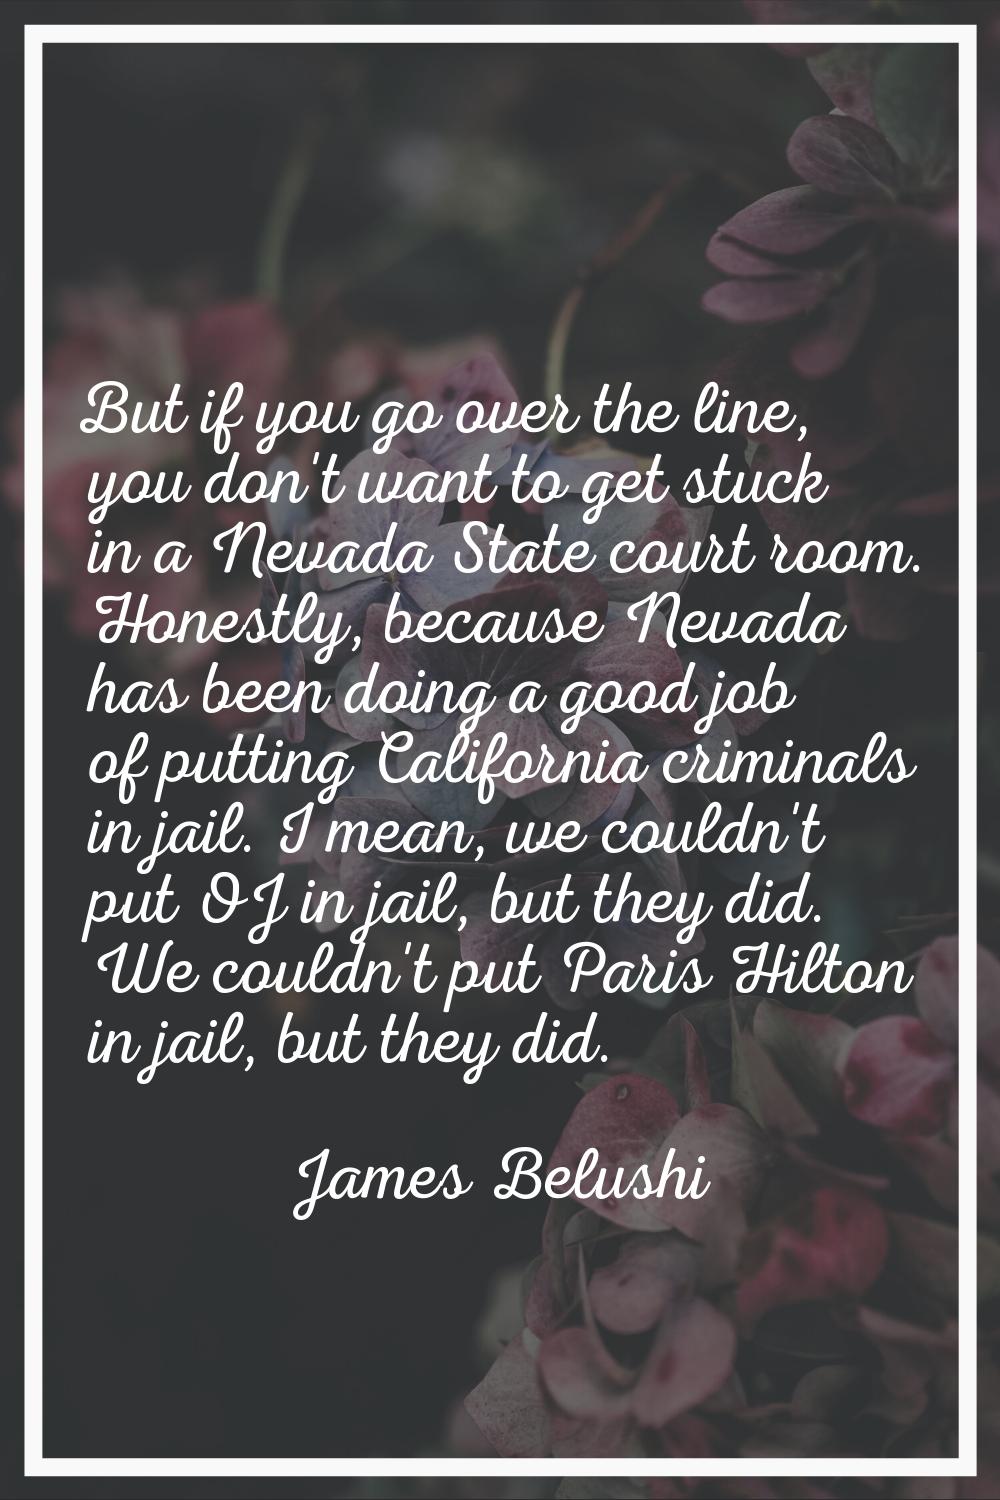 But if you go over the line, you don't want to get stuck in a Nevada State court room. Honestly, be